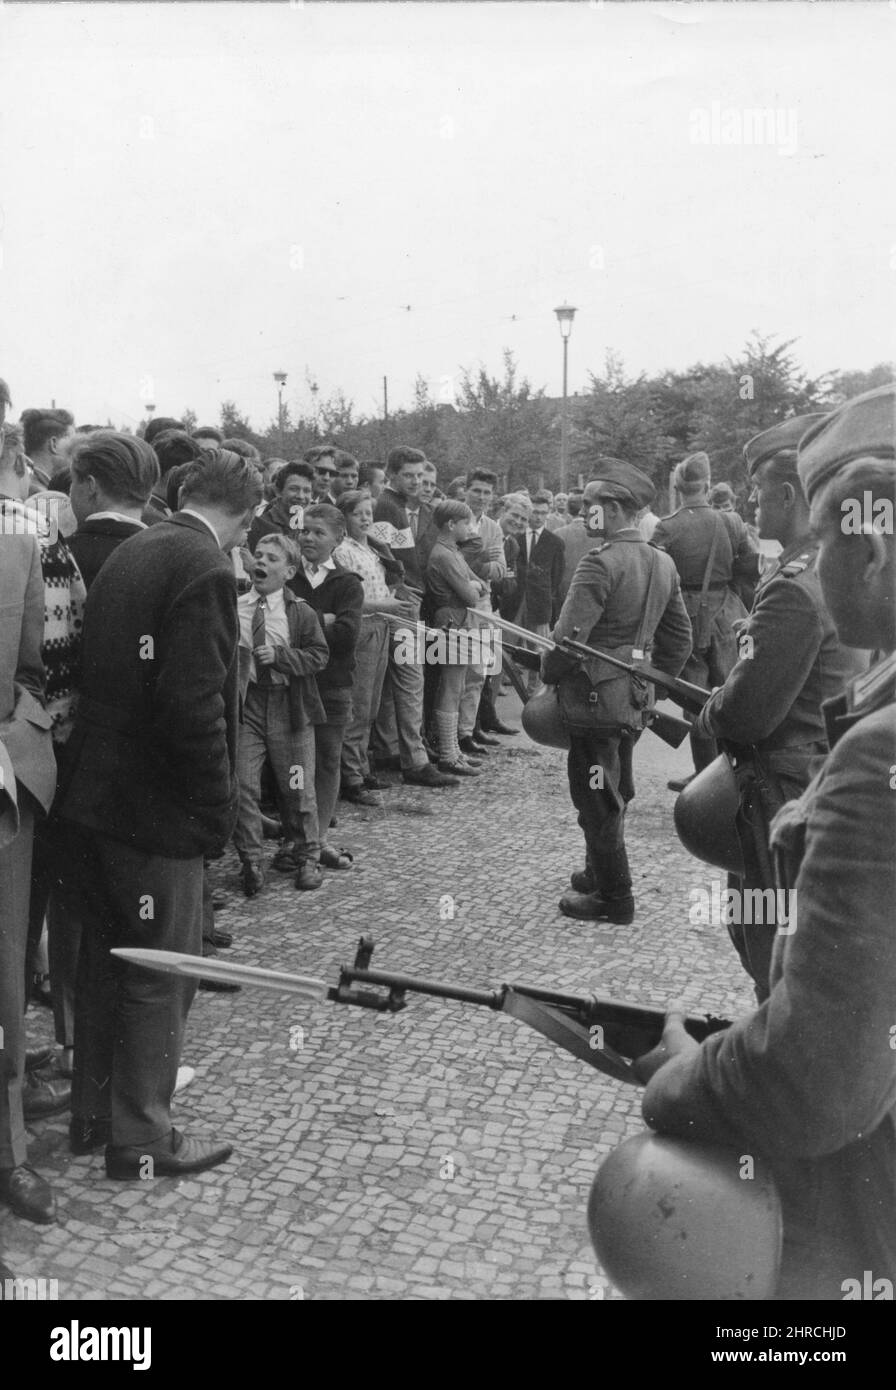 Heavily armed troops of the East German police patrol along the Red sector of the city to halt the flow of East Germans into the West. Here they use bayonets to push back the crowds. The cold steel and heavy military activity reduced the flow of refugees to a trickle. Berlin, Germany, 1961. Stock Photo